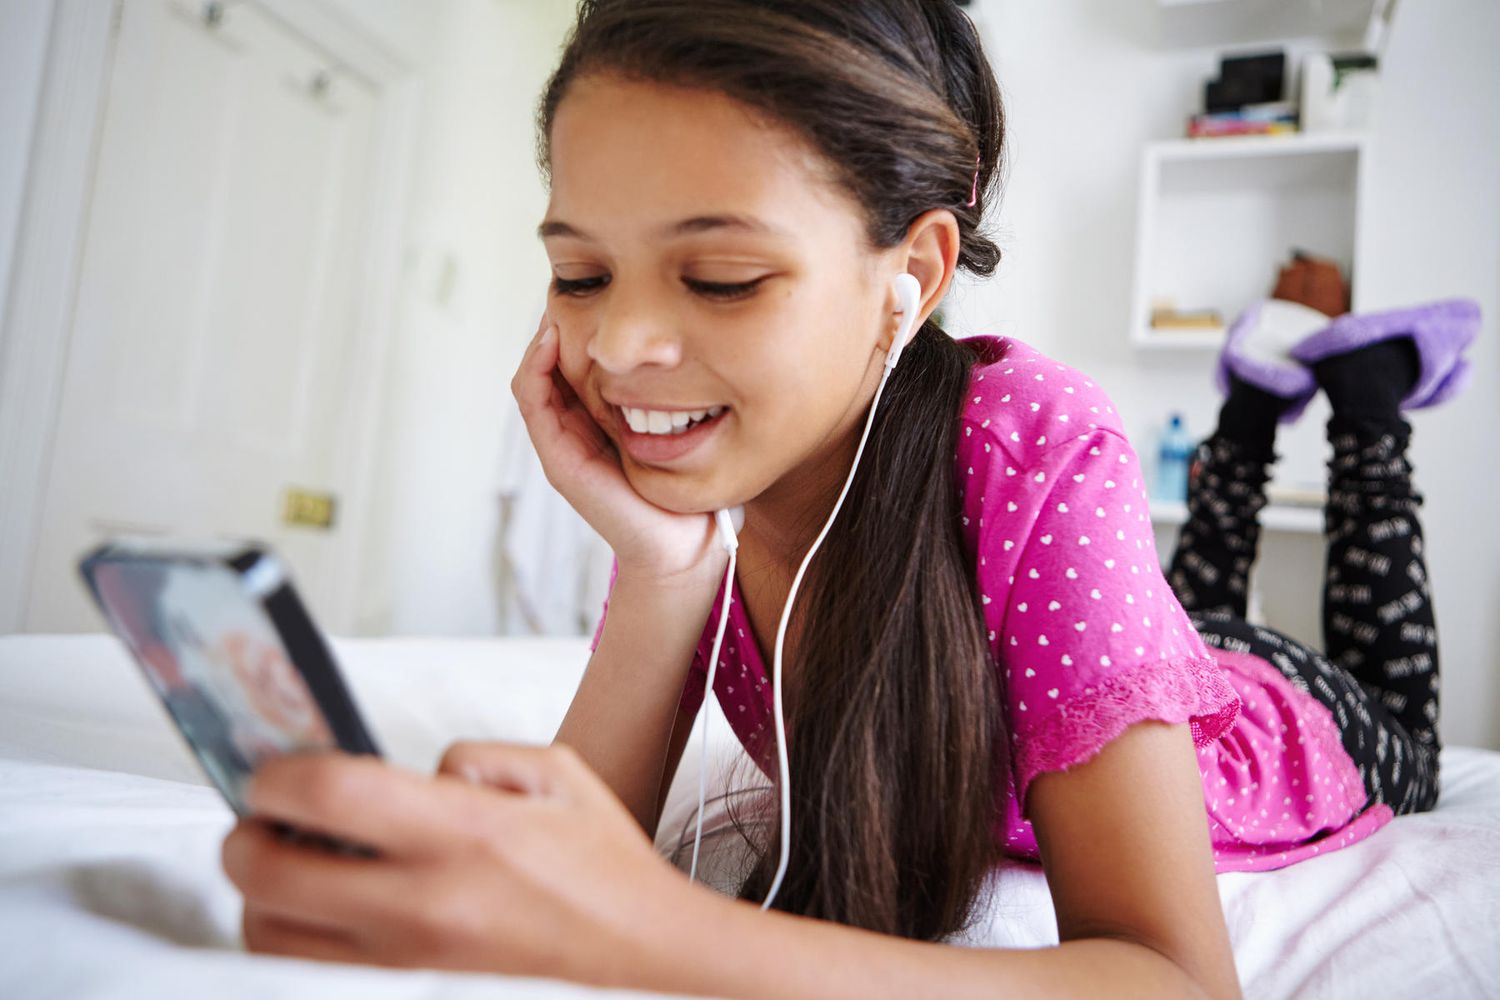 12 Podcasts Your Kids Should Be Listening To